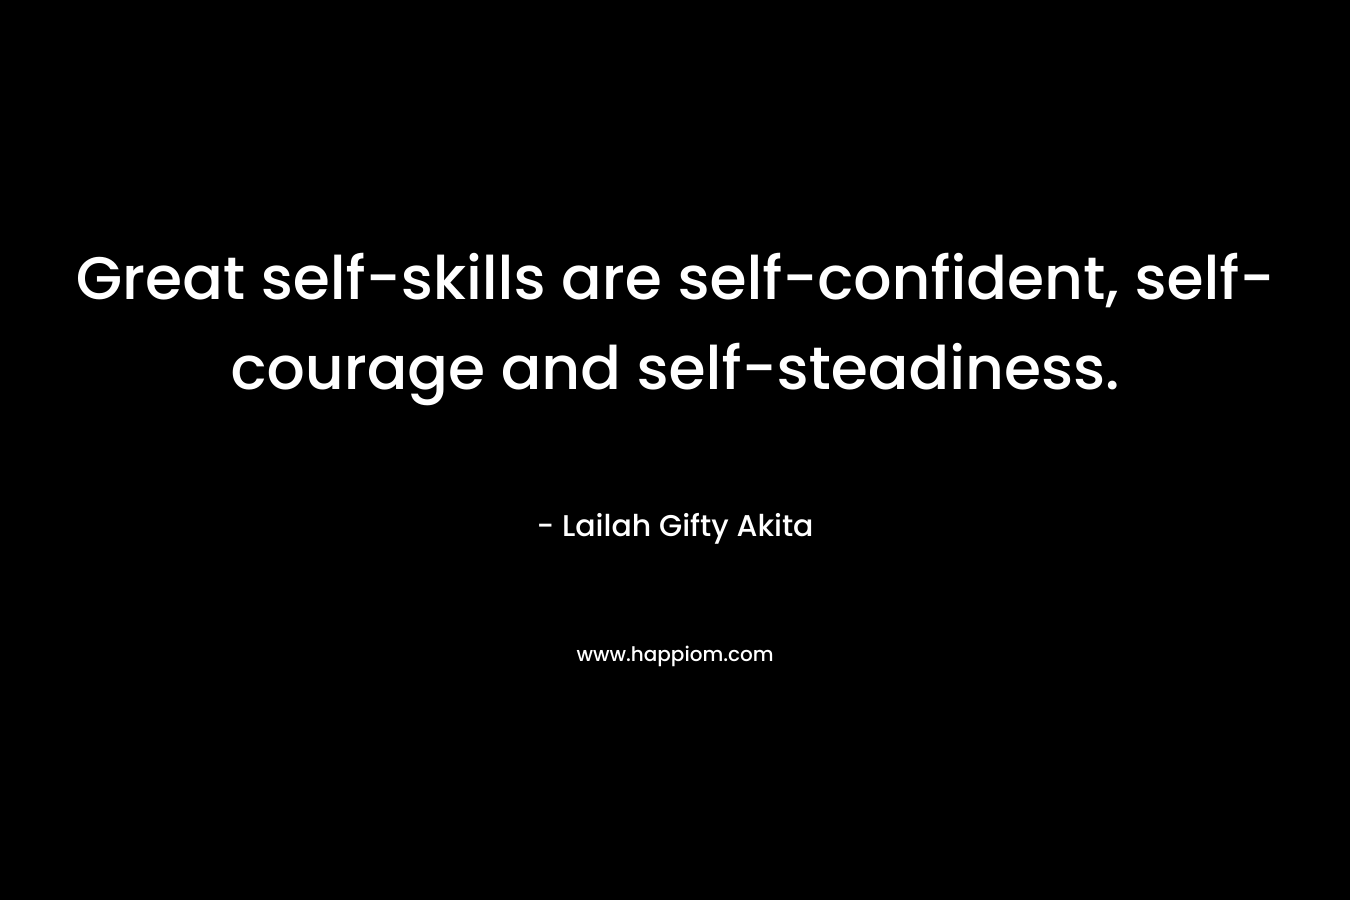 Great self-skills are self-confident, self-courage and self-steadiness. – Lailah Gifty Akita